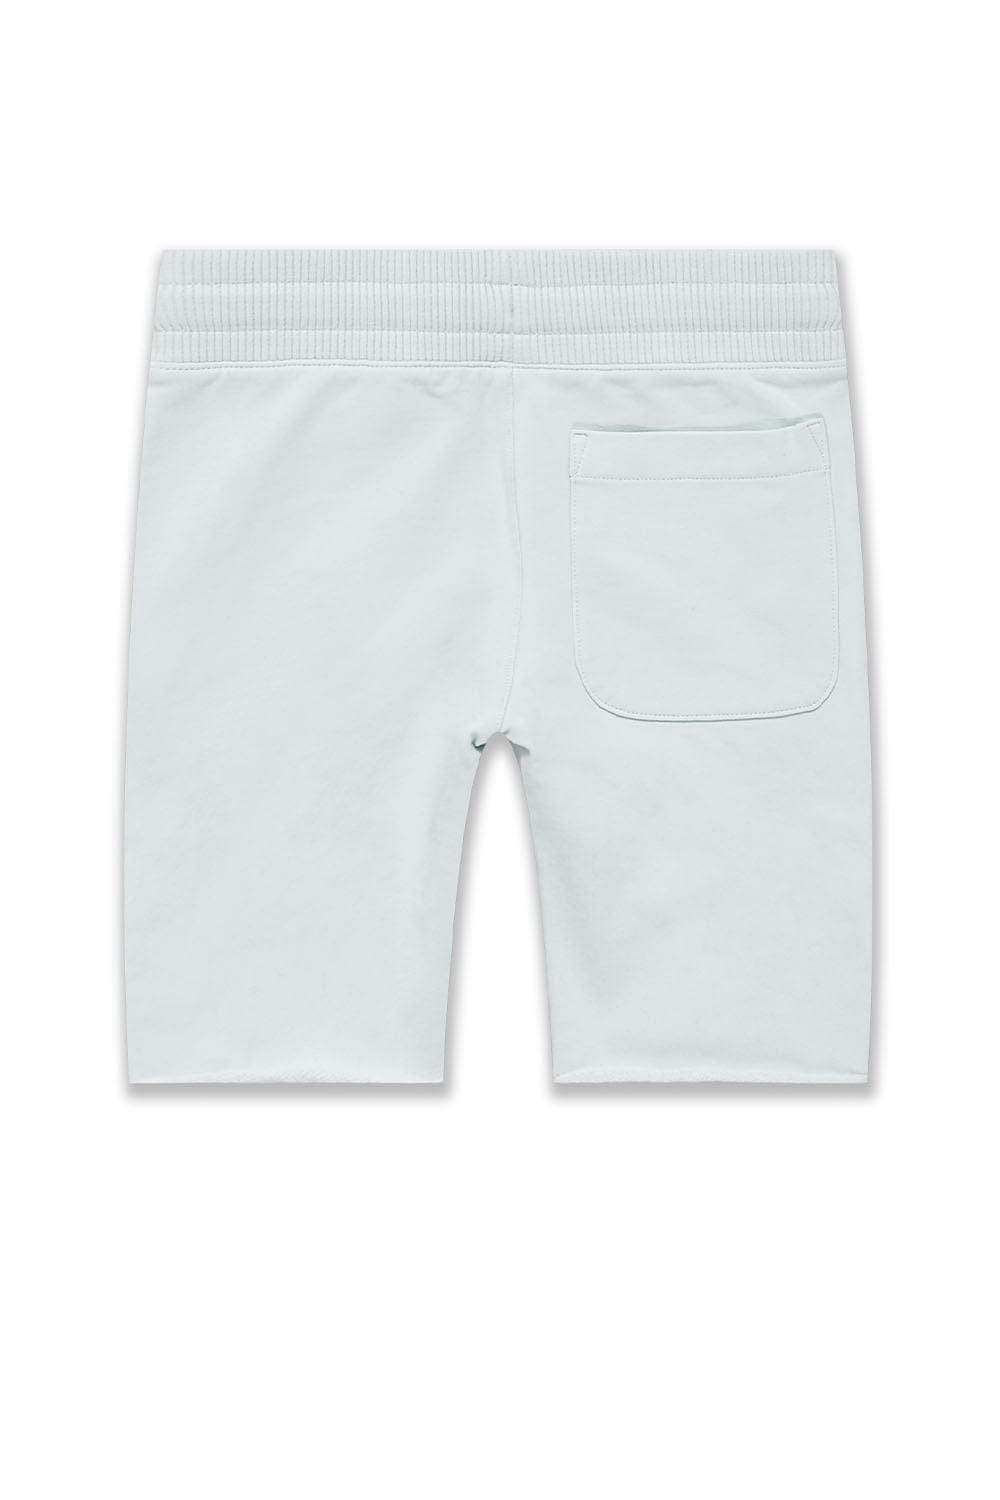 JC Kids Kids Palma French Terry Shorts (Exclusive Colors)